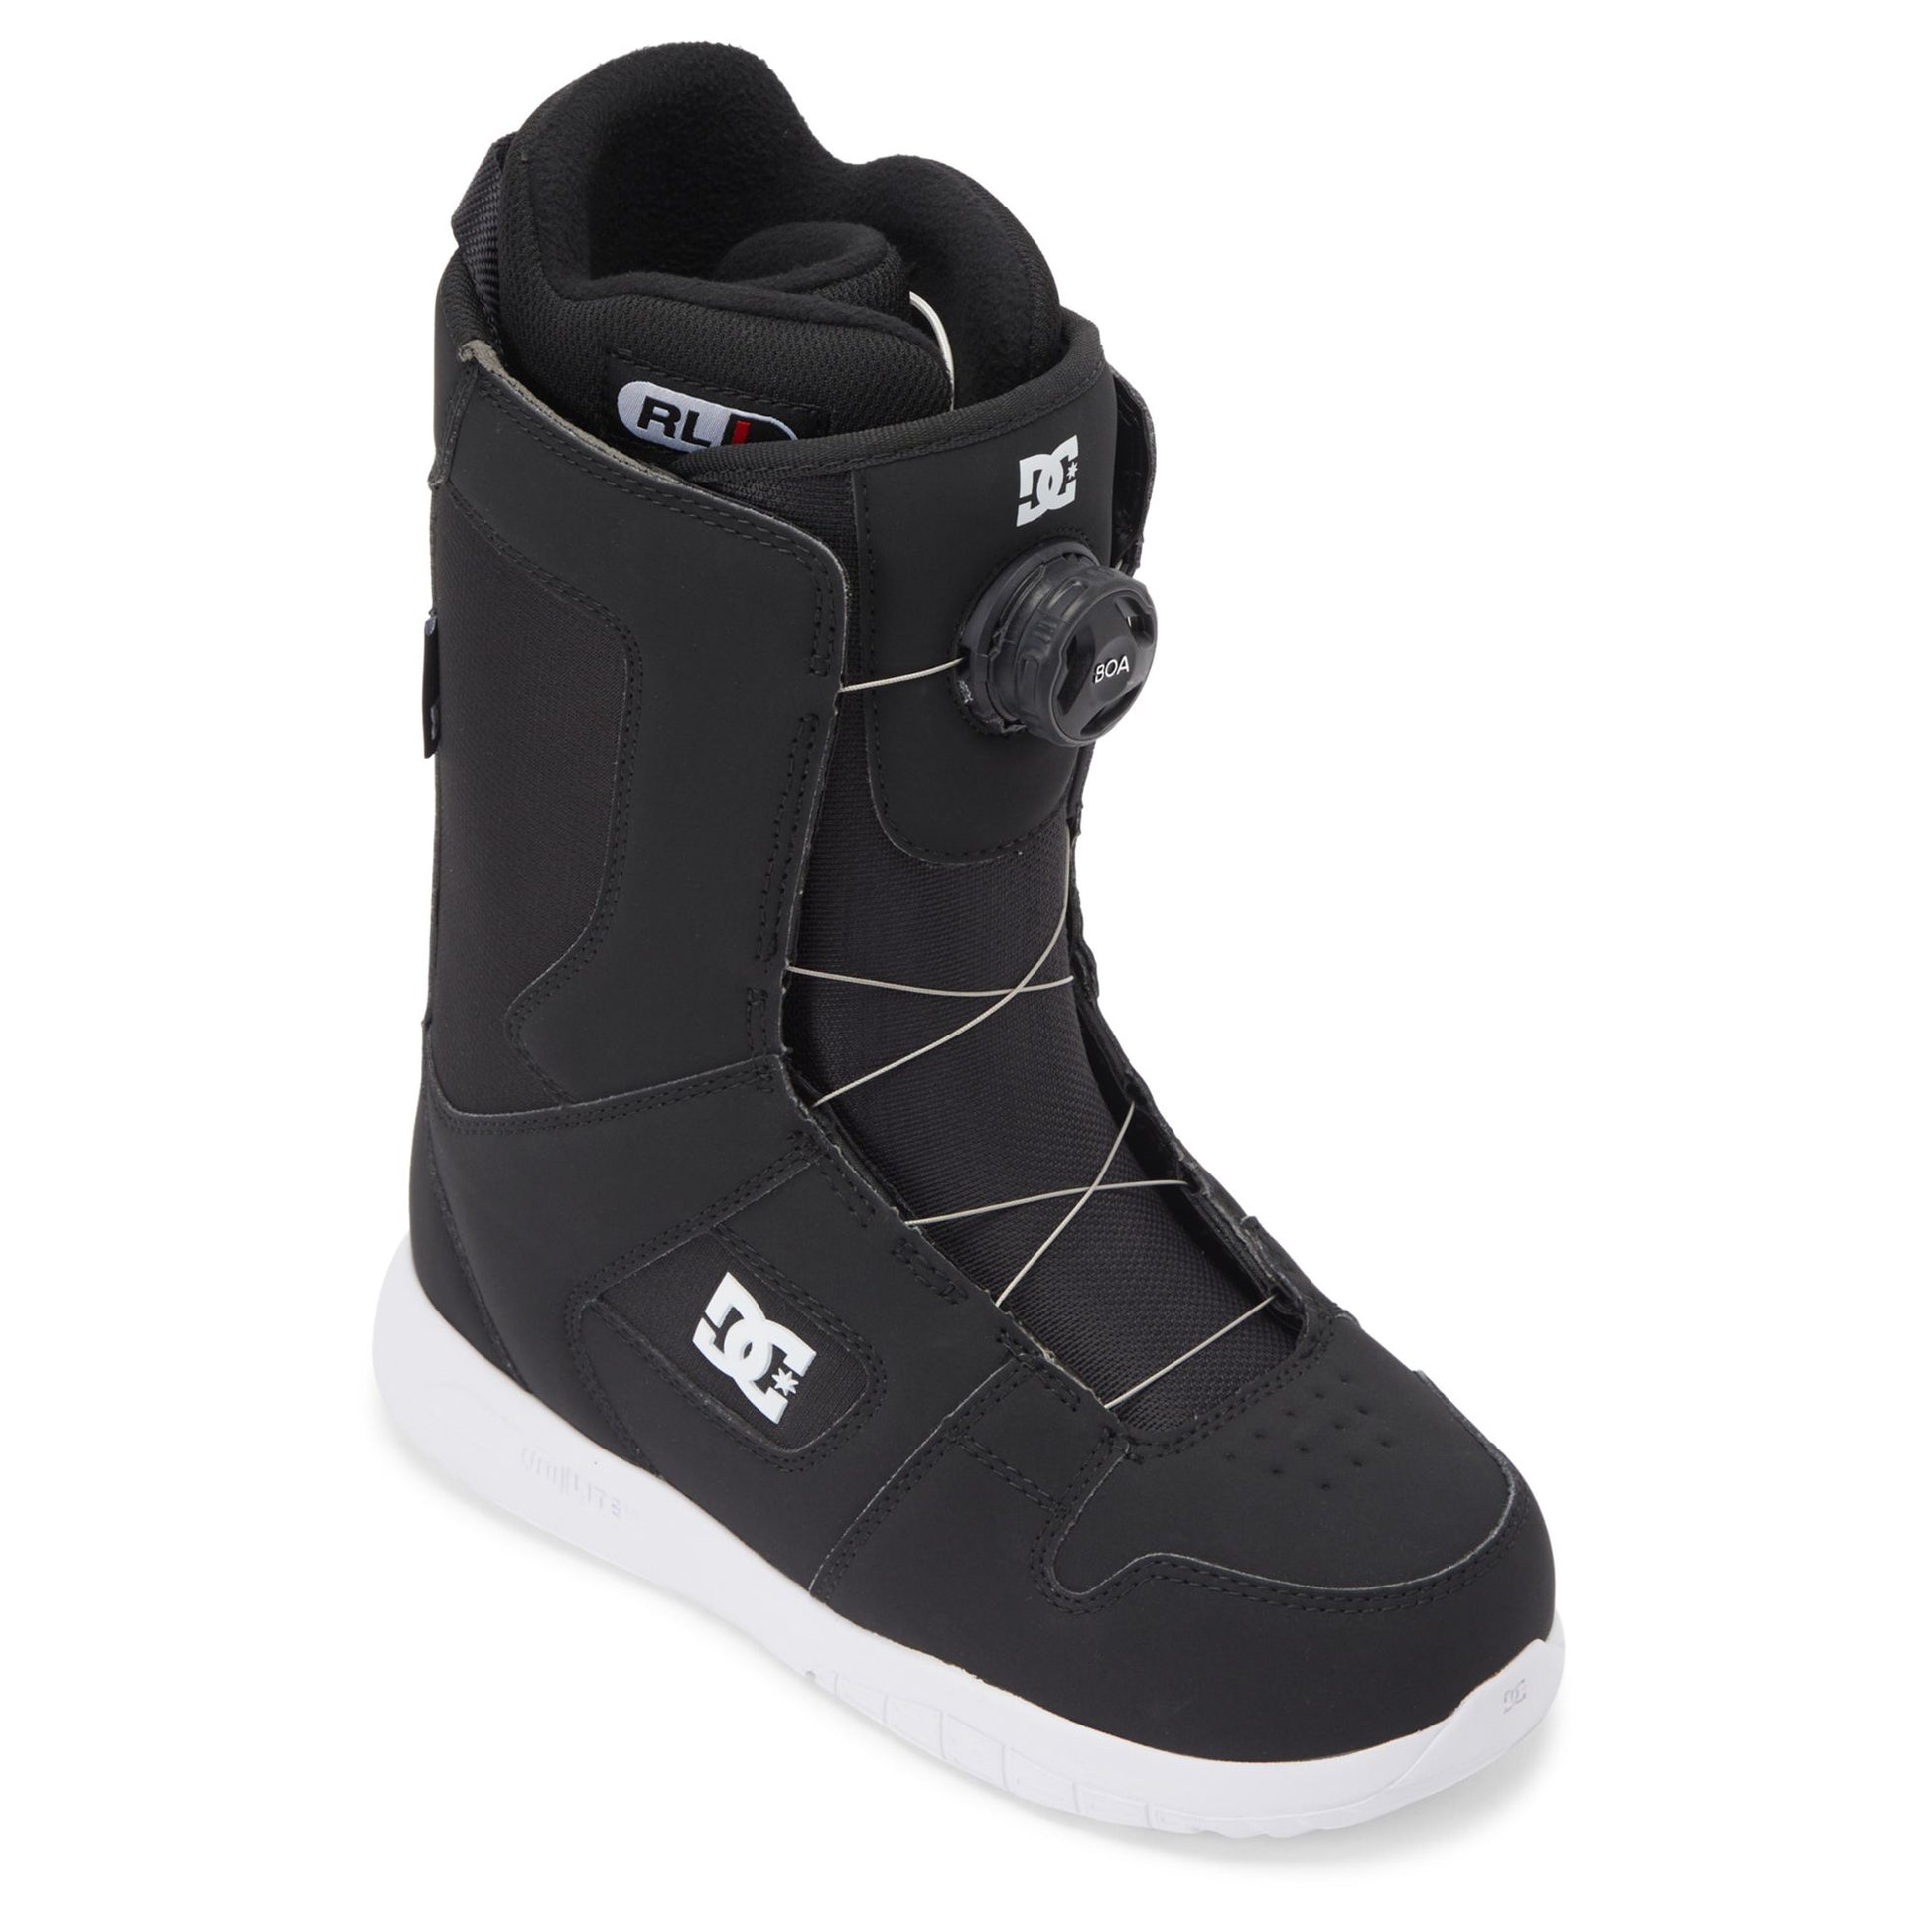 DC Women's Phase BOA Snowboard Boots Black White Snowboard Boots